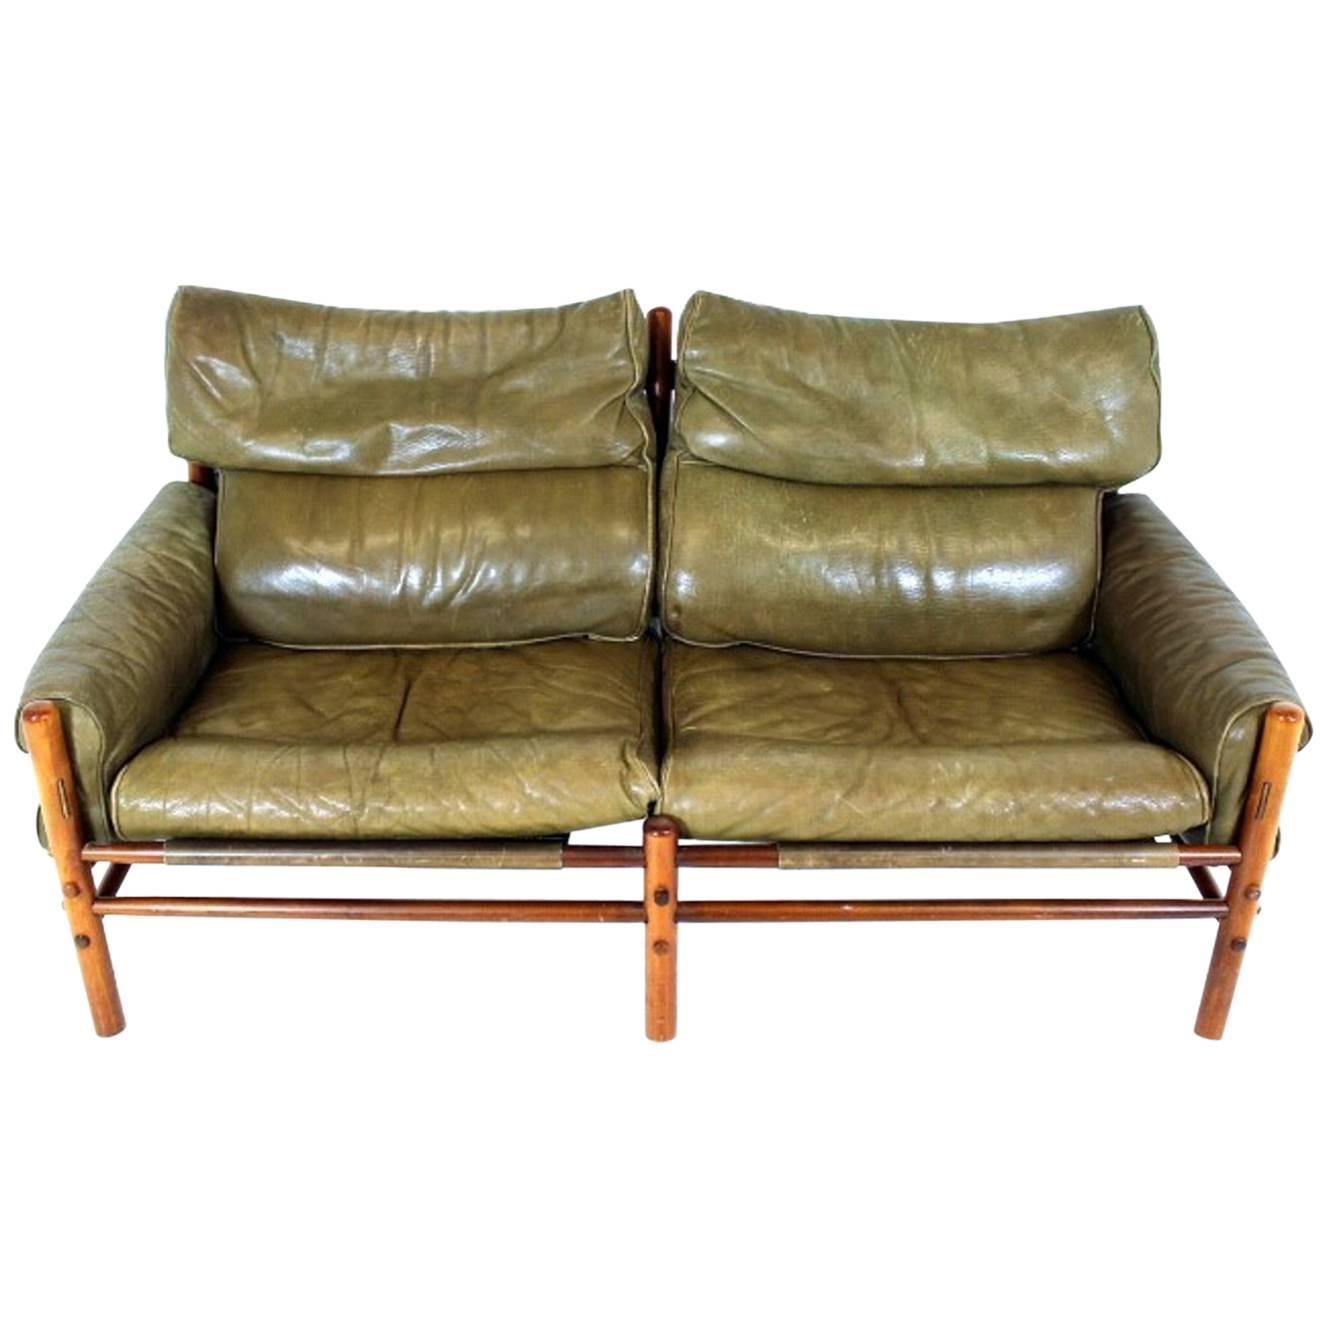 Two-Seat Leather Sofa Model Kontiki Designed by Arne Norell for Norell AB Sweden